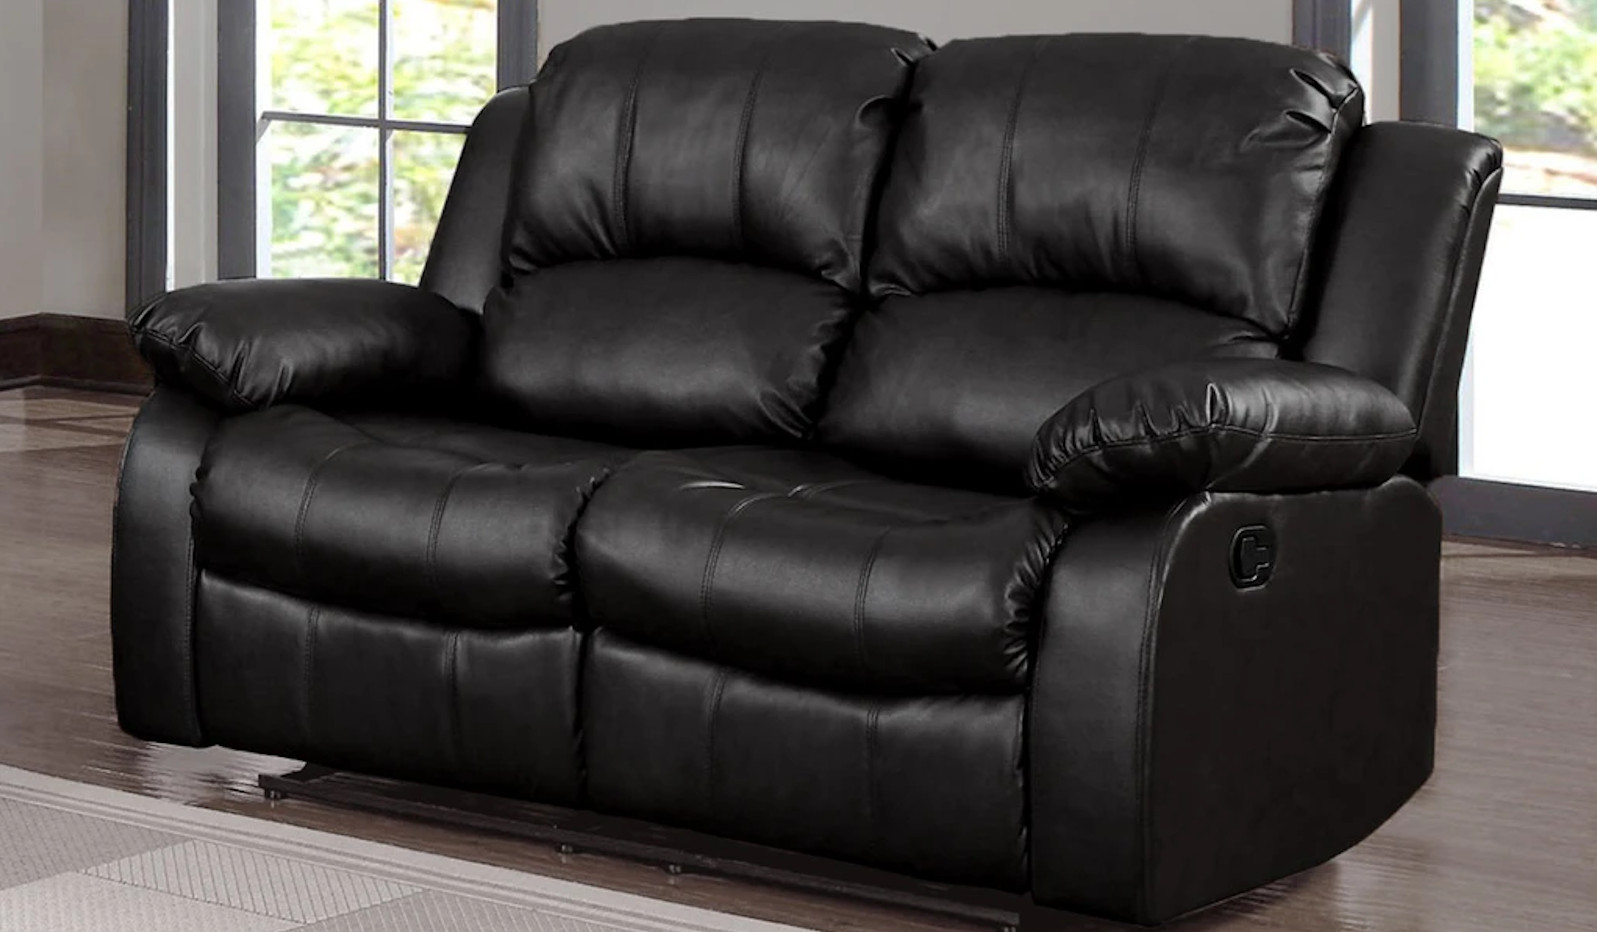 recliners budget price